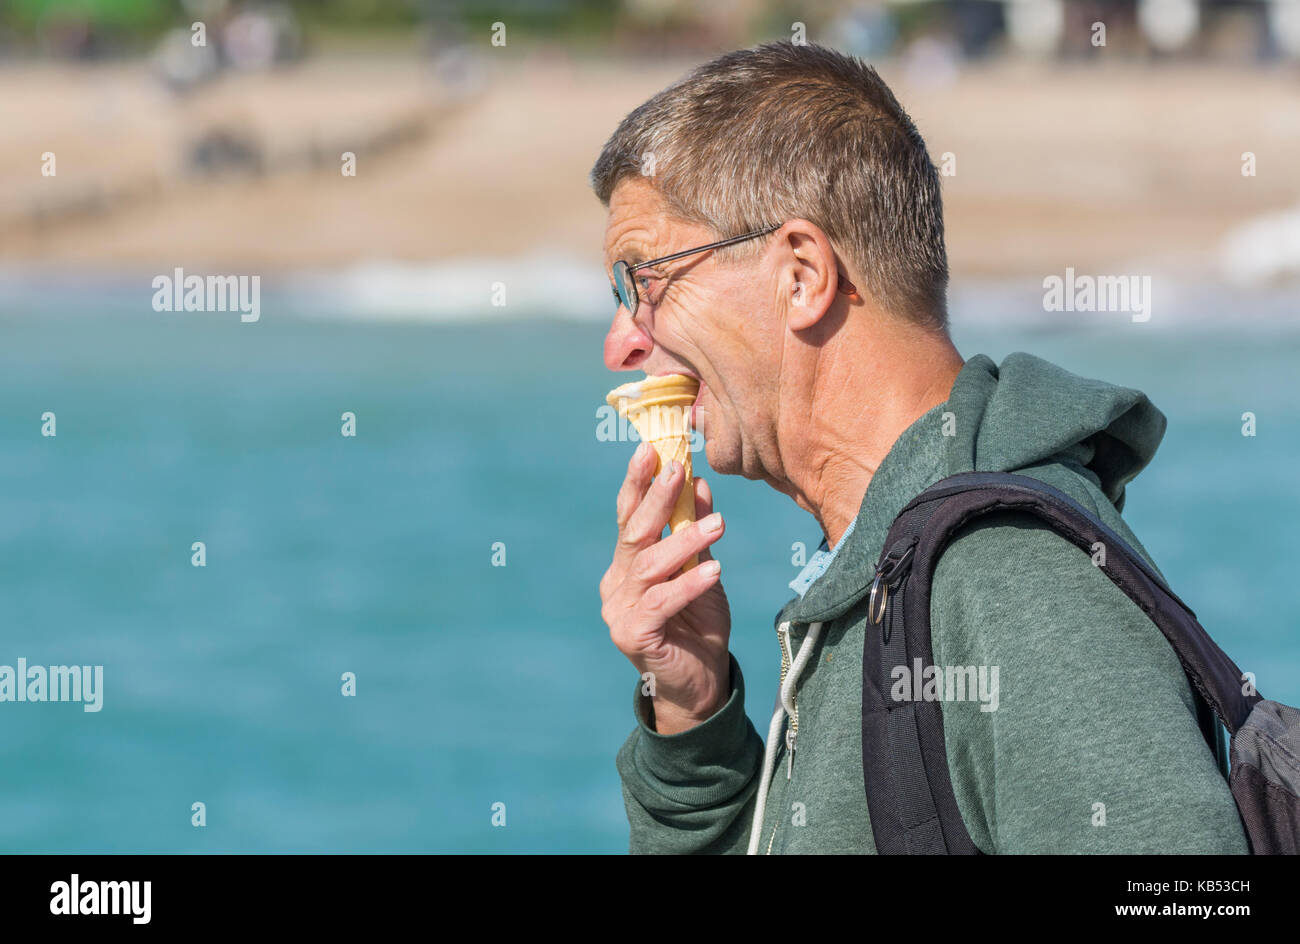 Middle aged man eating an ice cream cone. Stock Photo